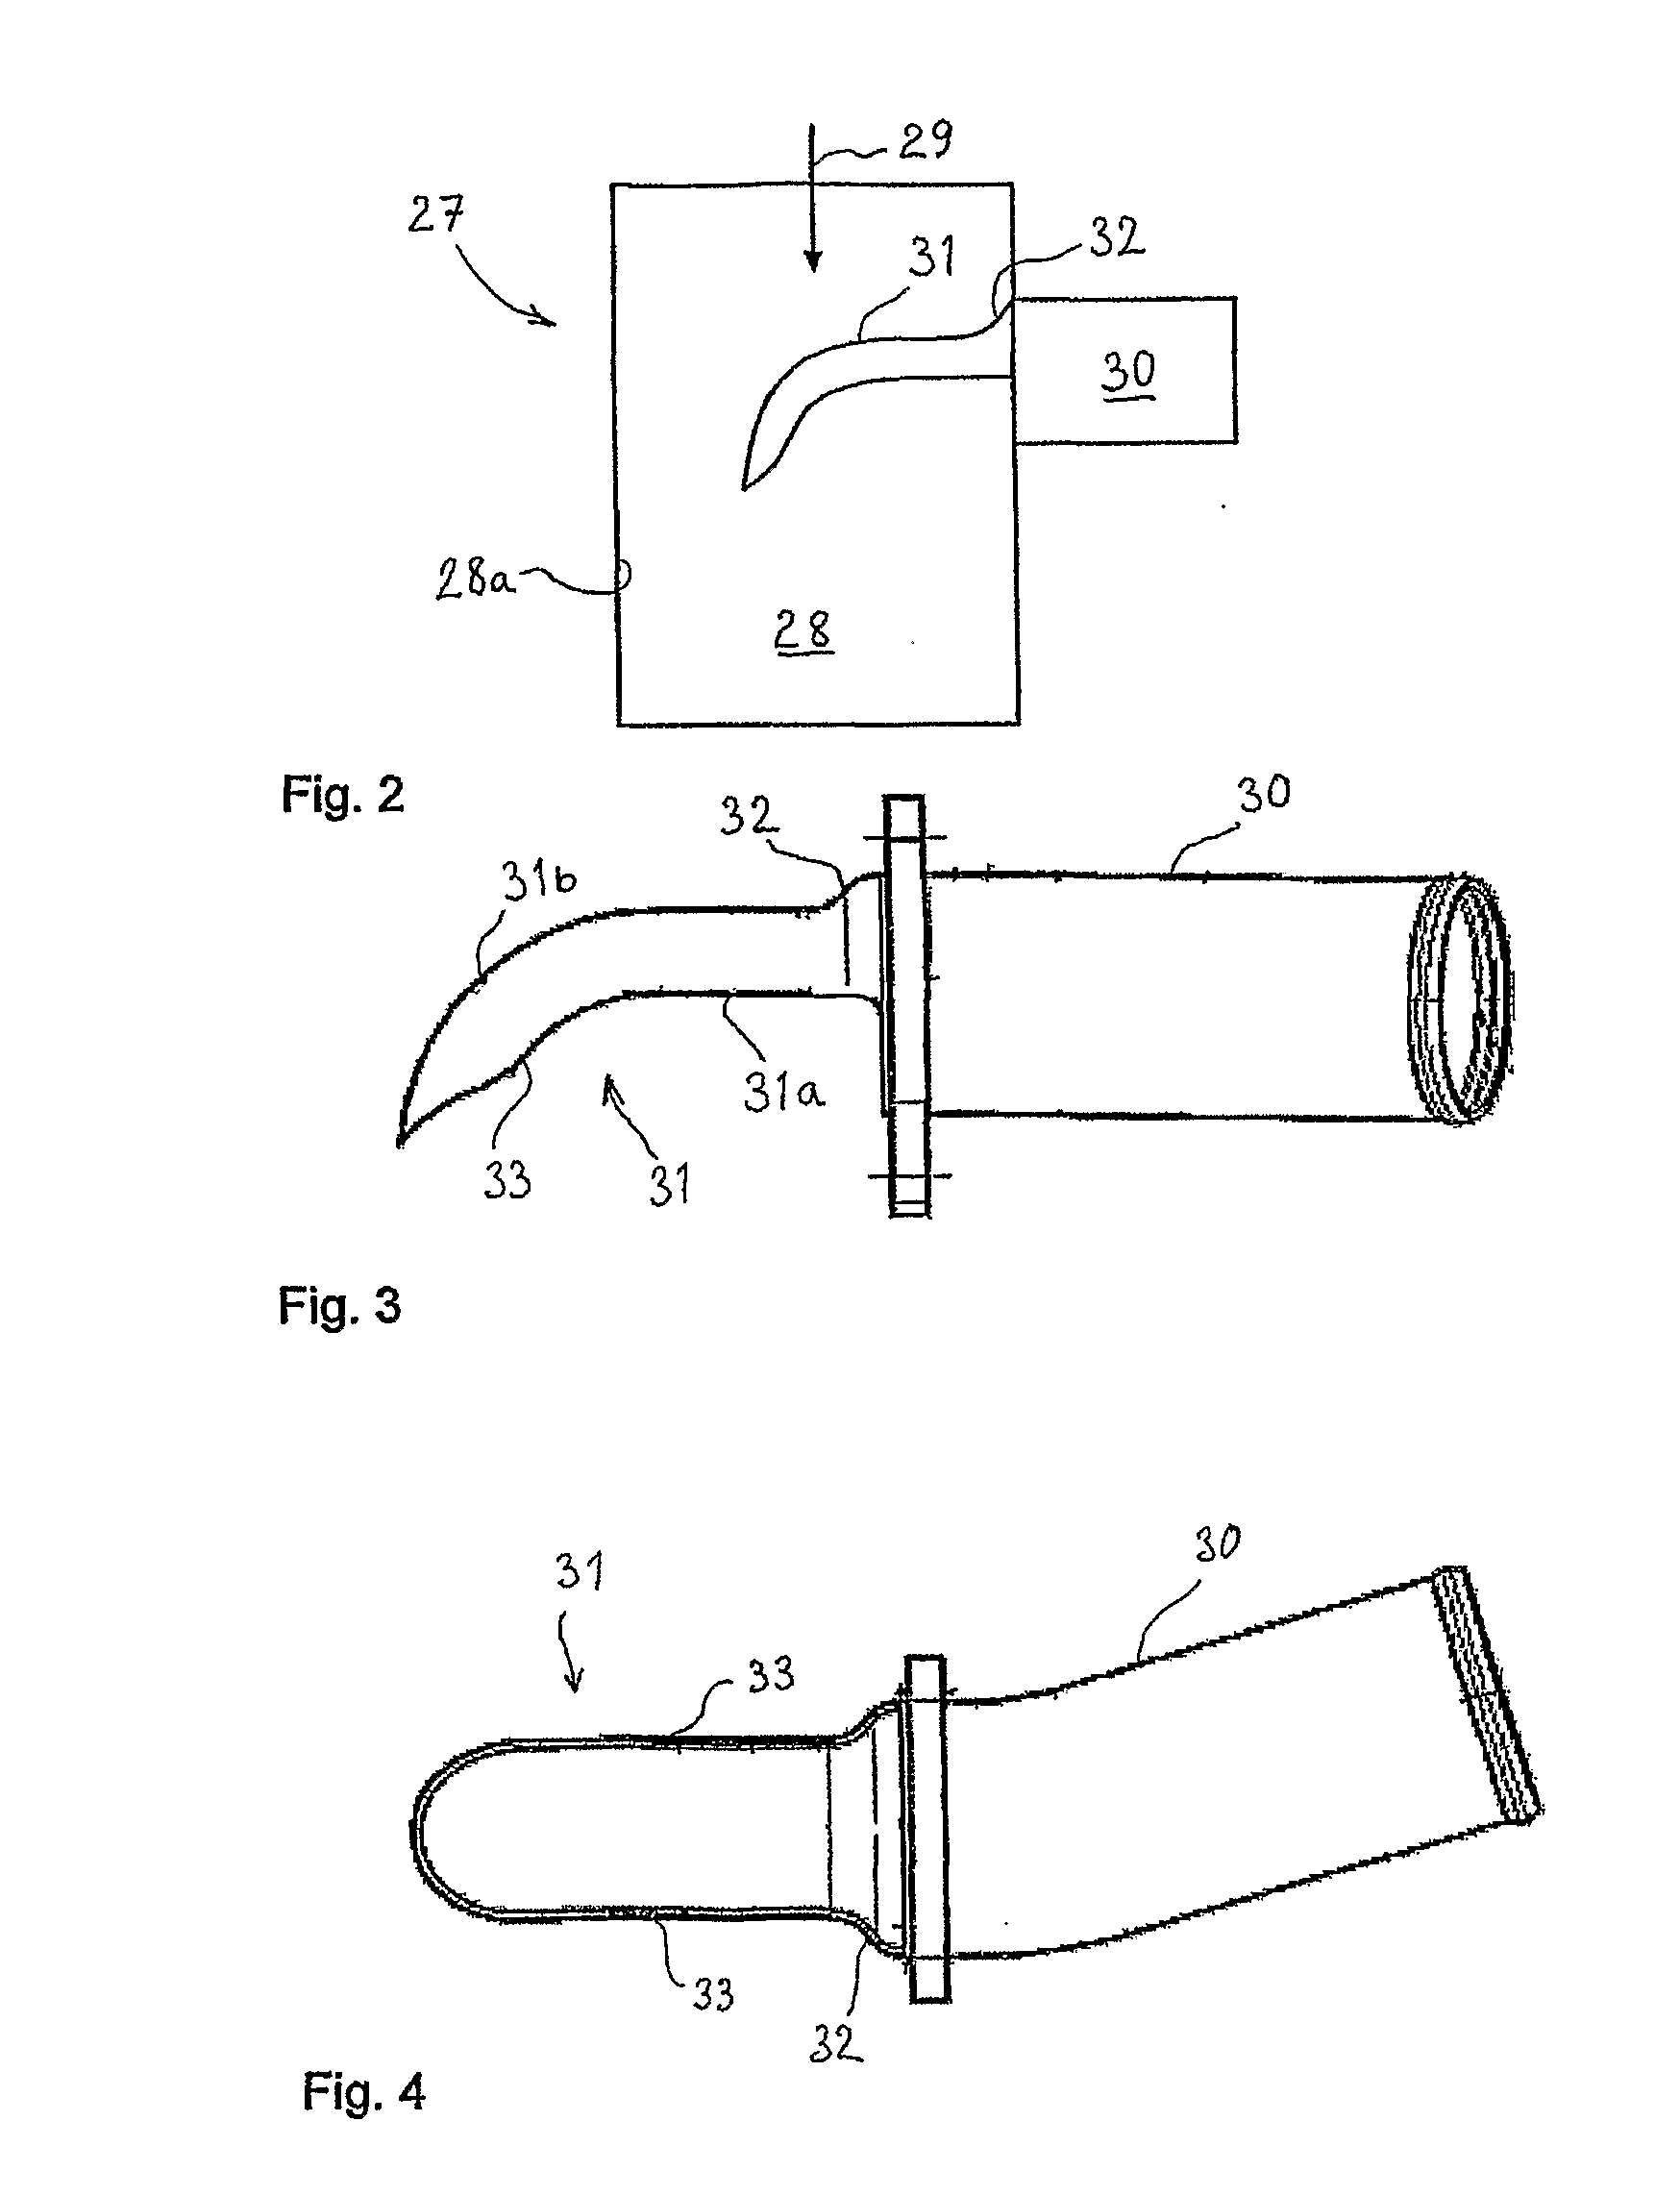 Exhaust Gas Recirculation Mixer for a Turbo-Charged Internal Combustion Engine